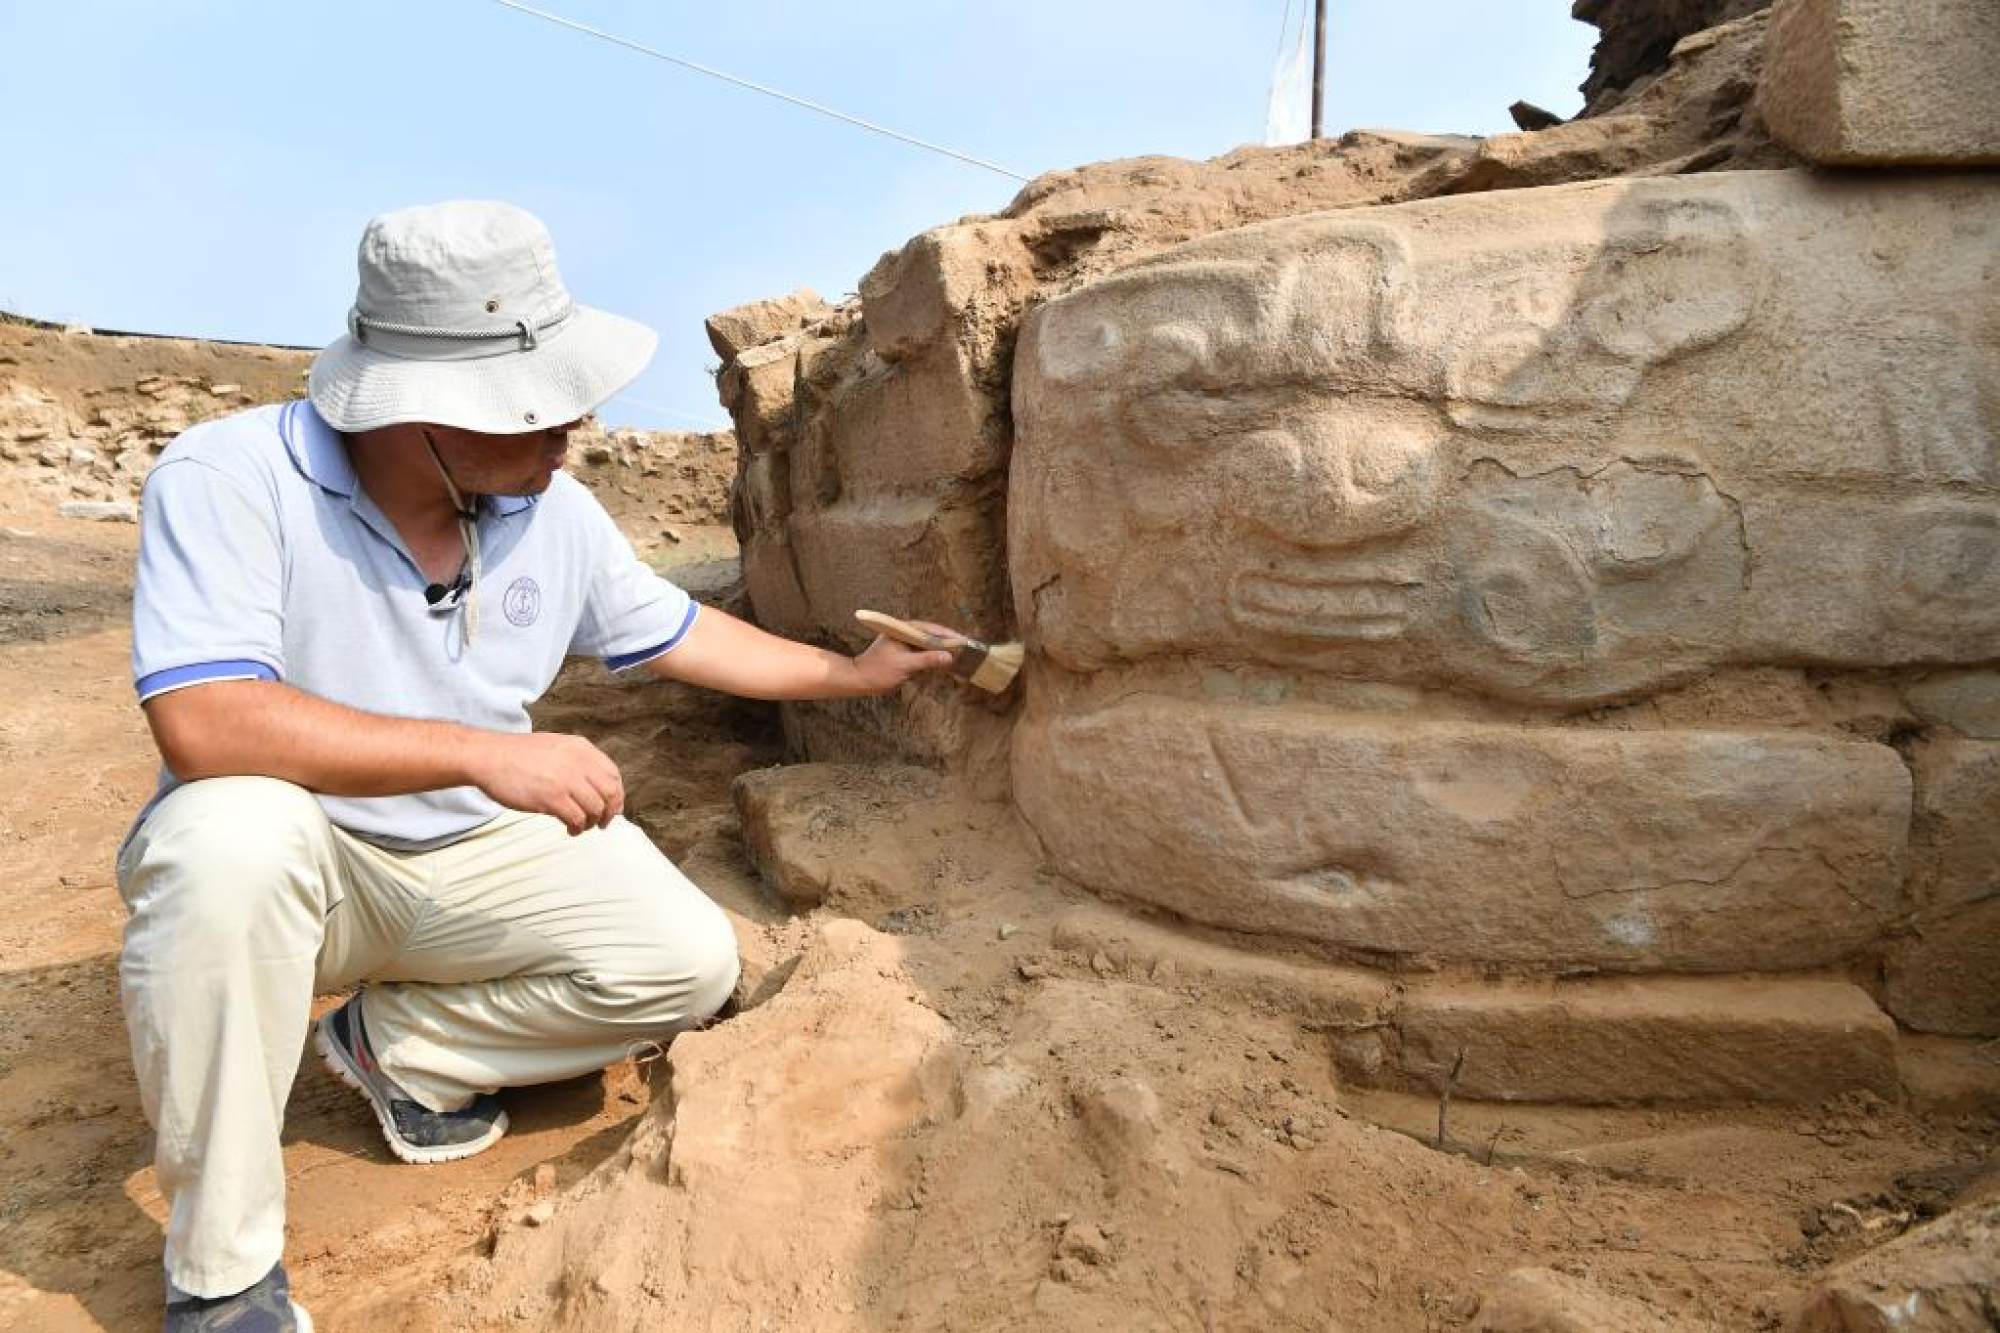 Archaeologists have unearthed two of three faces in a 2-metre stone sculpture. Photo: Handout